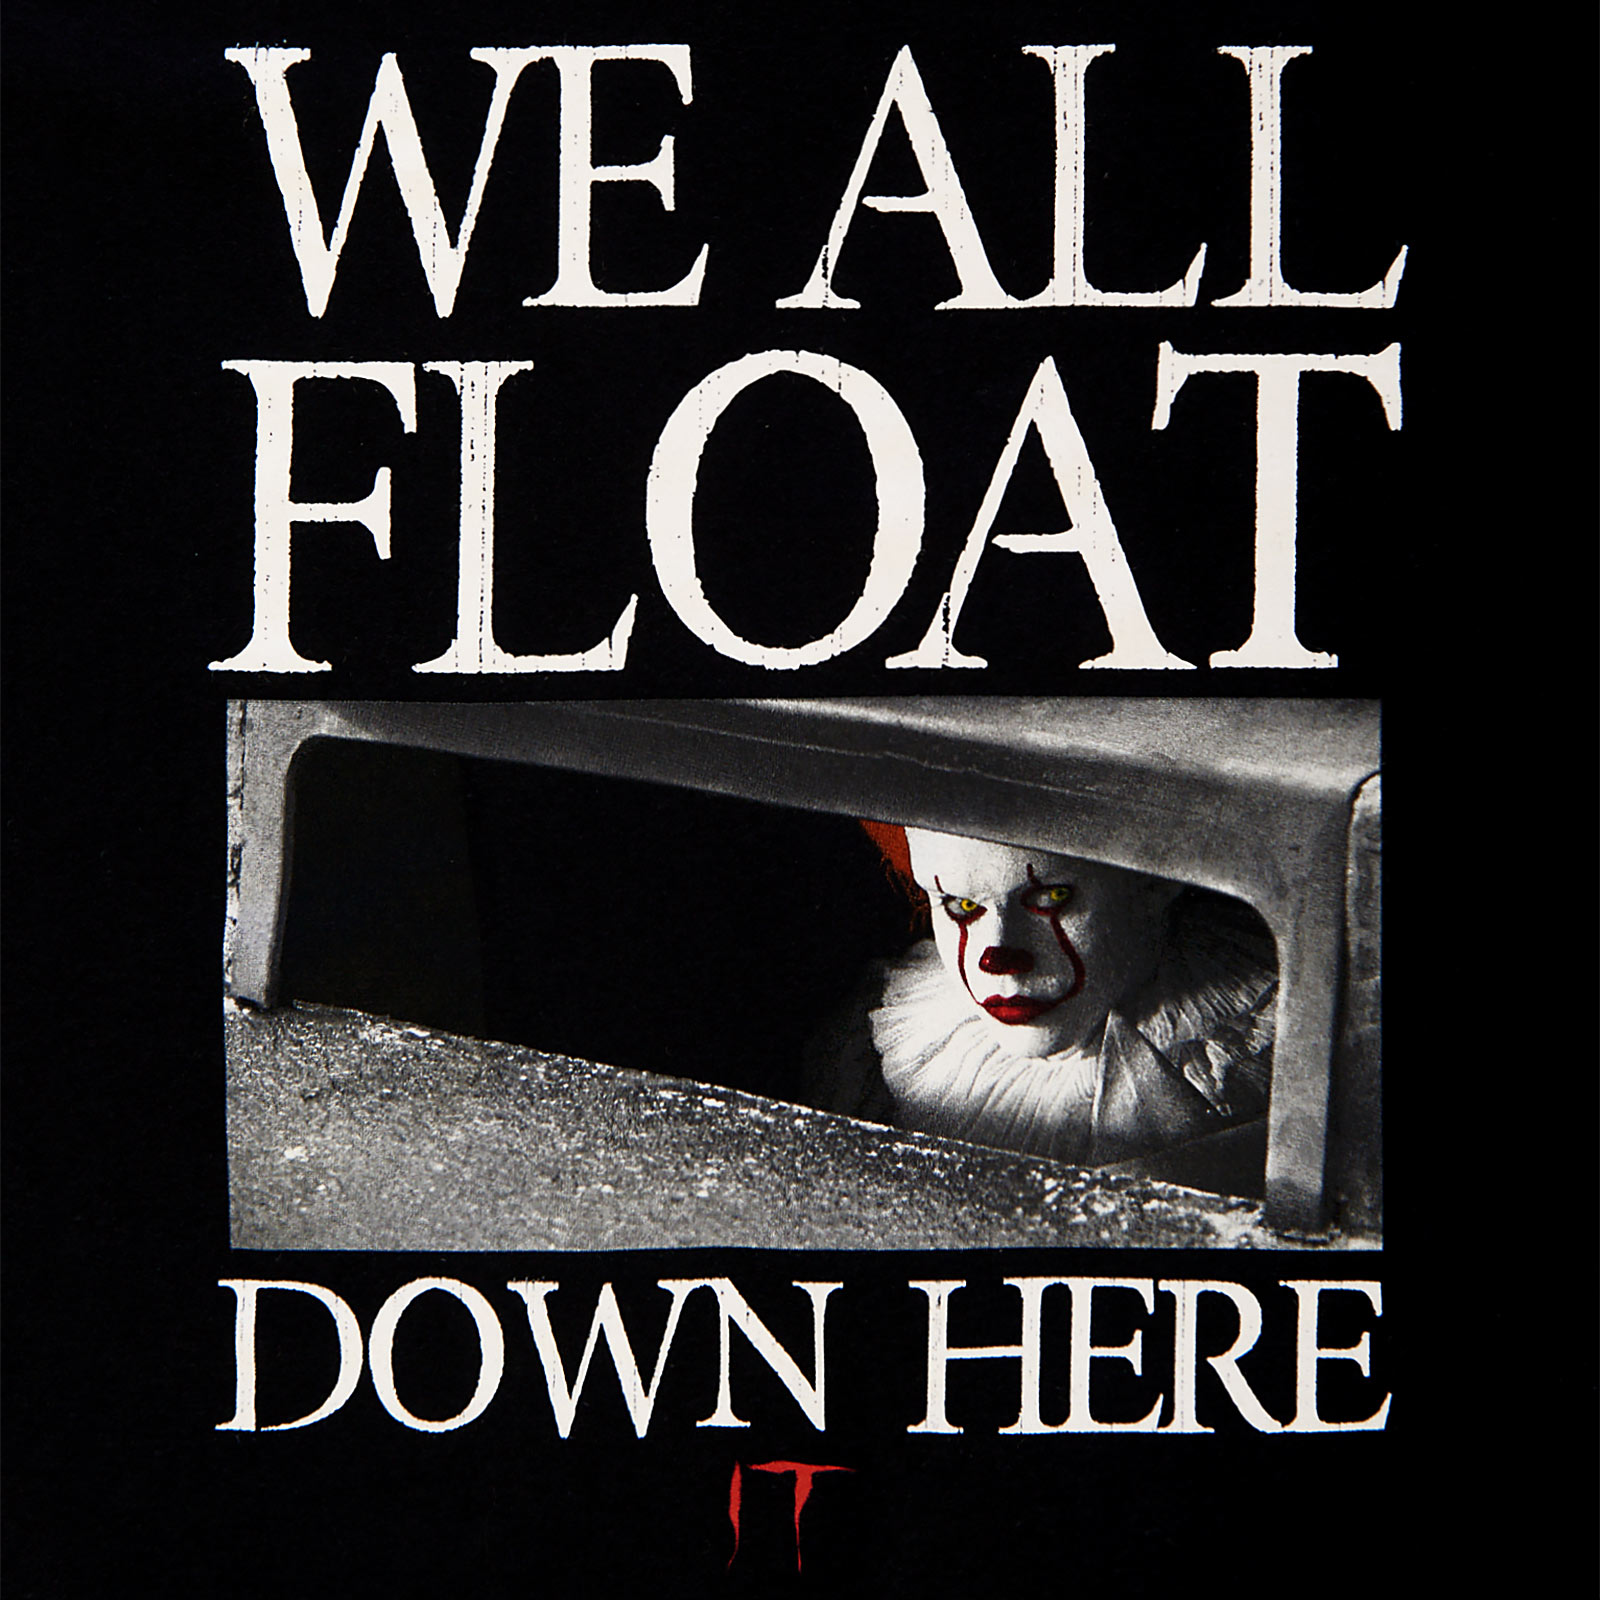 Stephen King's IT - Pennywise We All Float Down Here T-Shirt